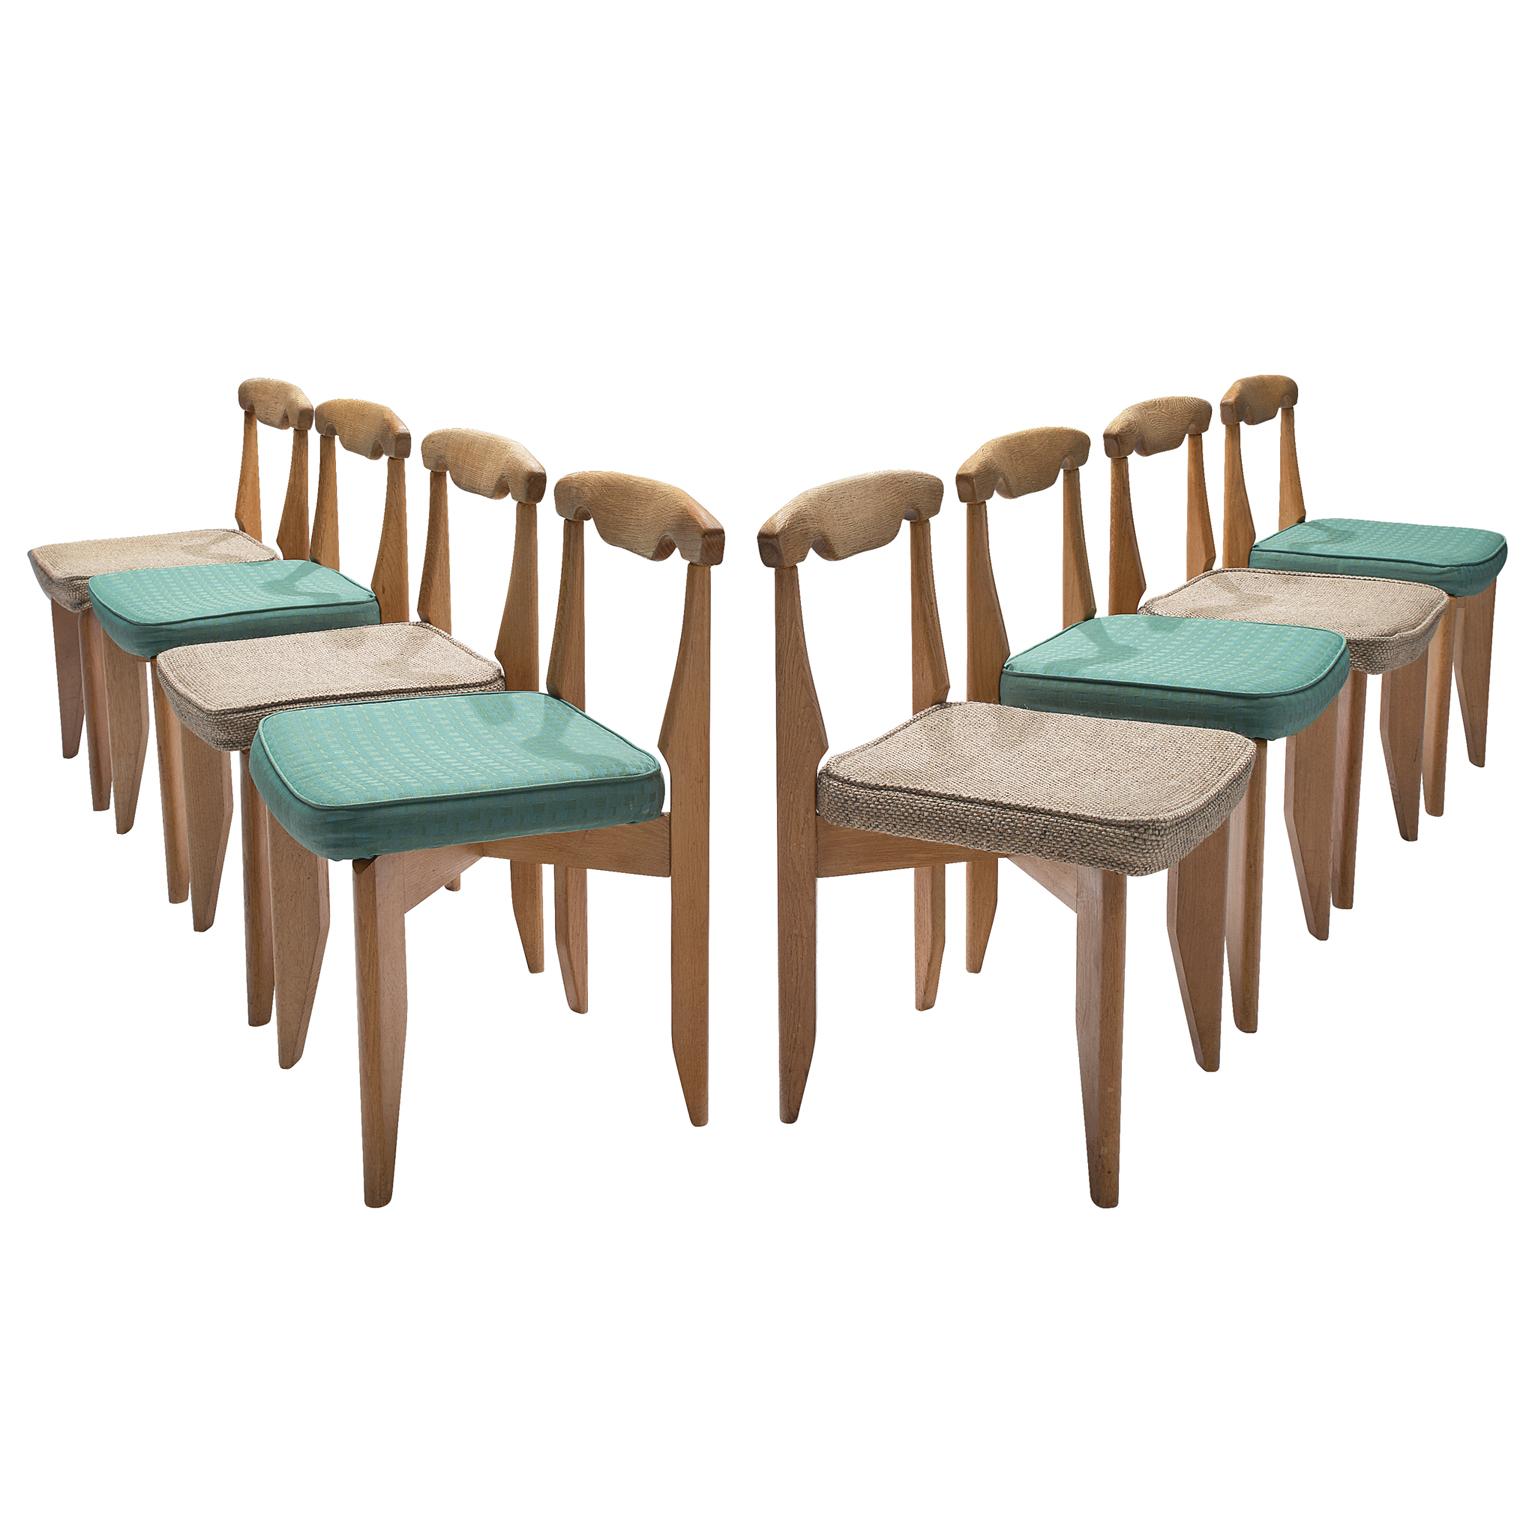 Guillerme et Chambron Set of Eight Dining Chairs in Oak